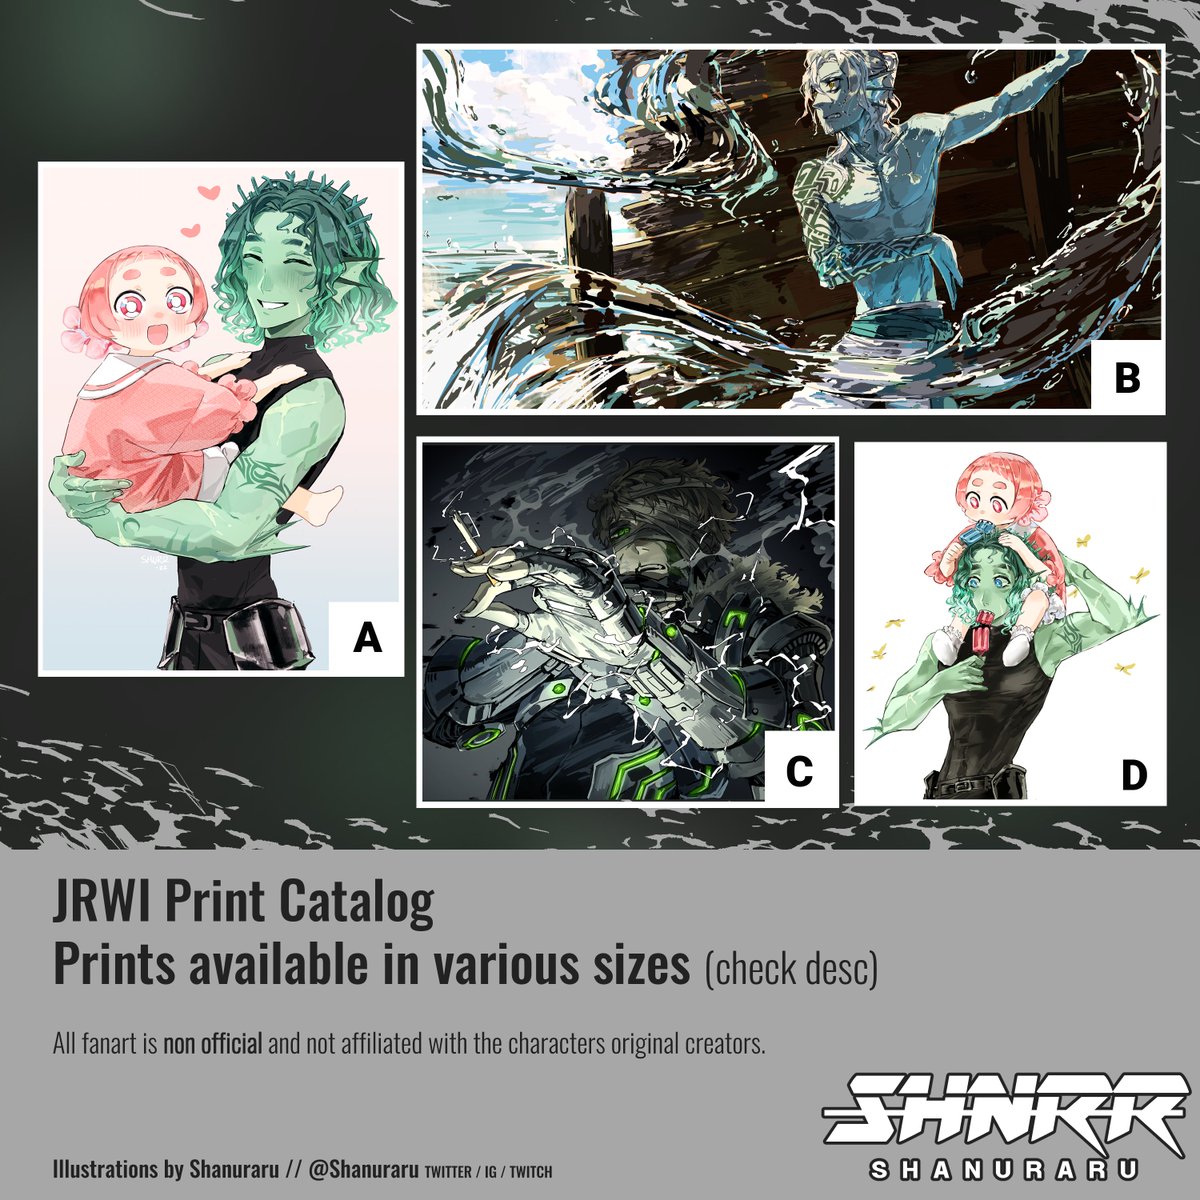 💥Print shop now OPEN!💥

To celebrate my personal print shop opening we have FREE SHIPPING WORLDWIDE until 22th of may.

Get yourself some cool art ⤵️
https://t.co/3SnfwuyVeY 